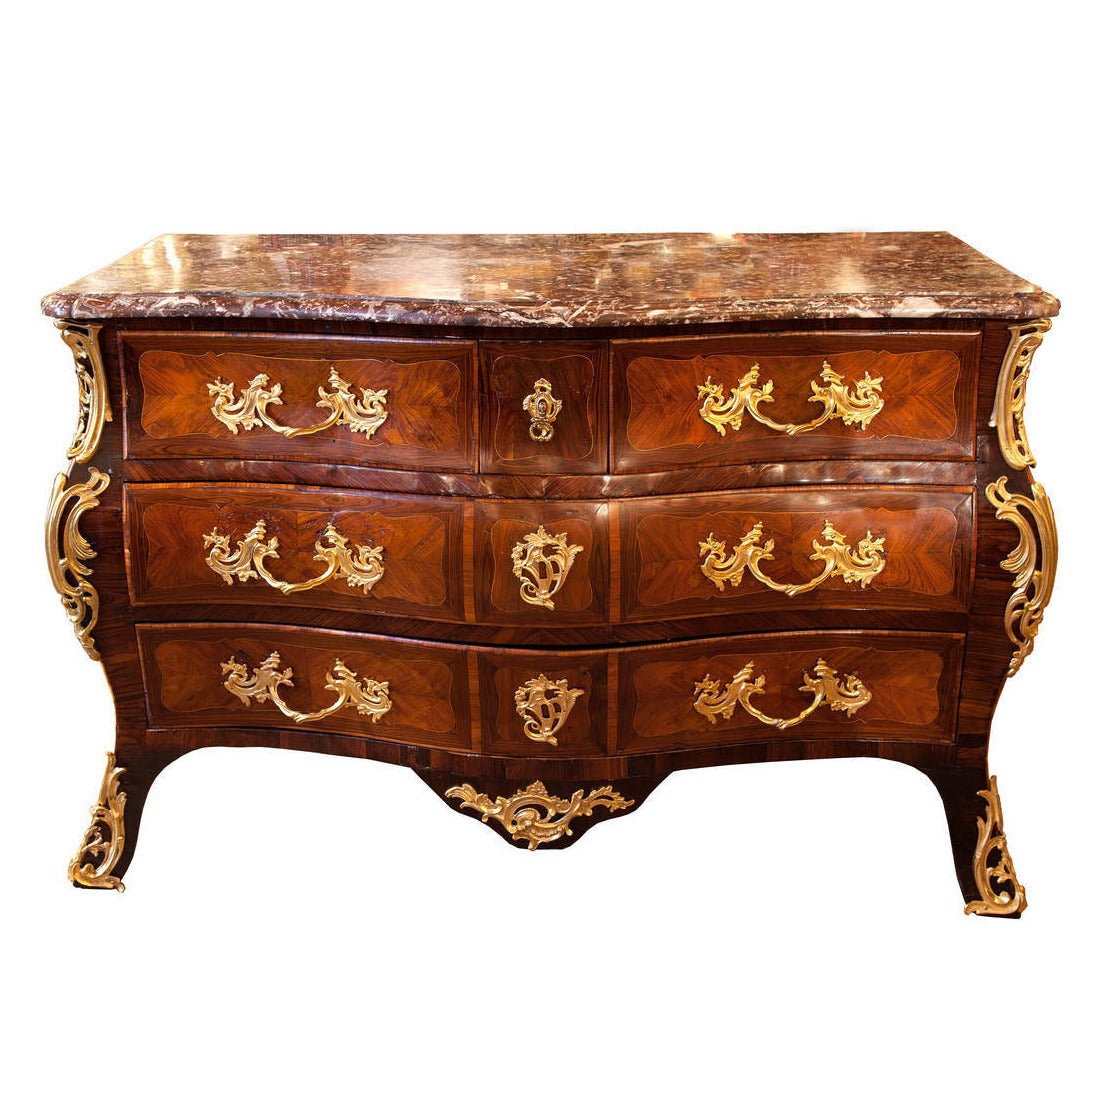 18th c. French Regency style  Commode / chest with ornate bronze dore mounts For Sale